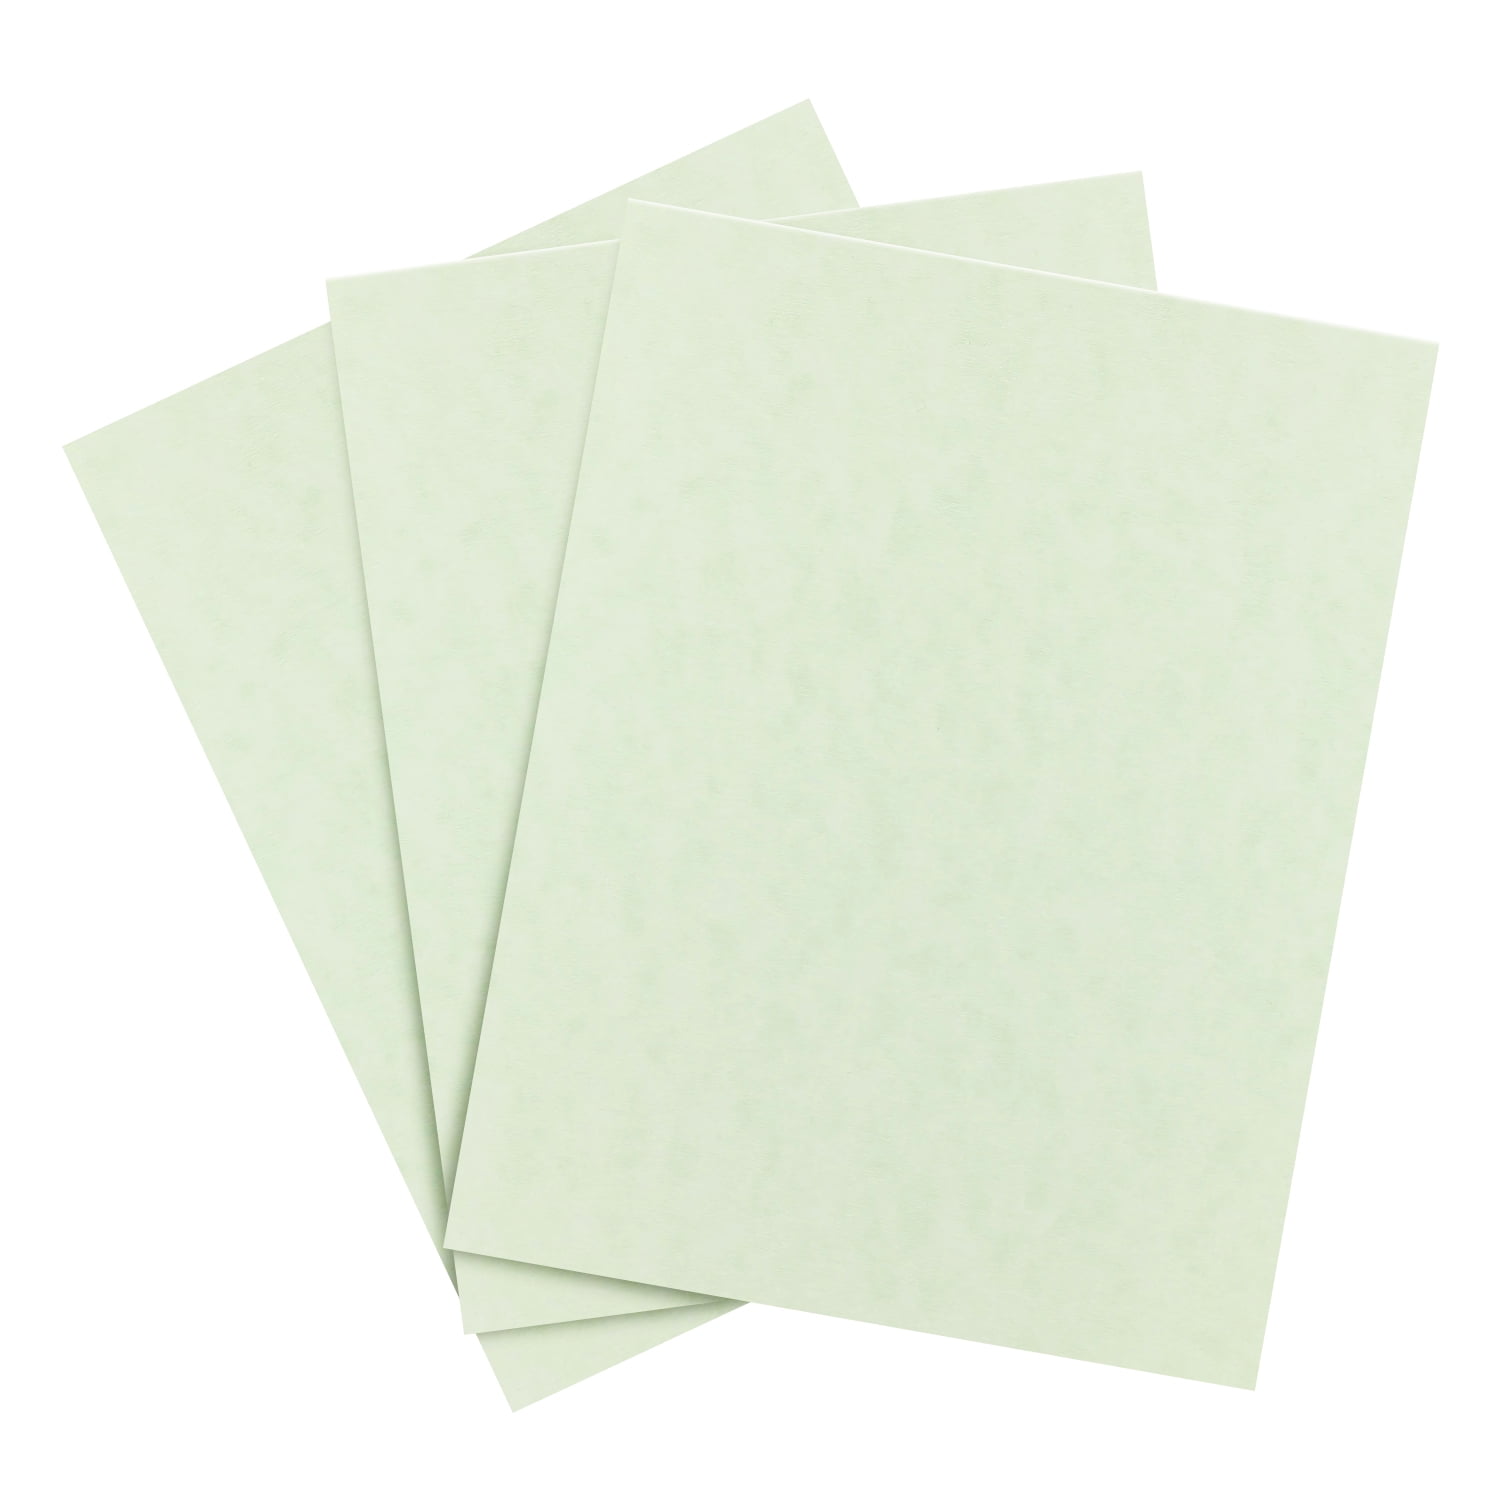 30 sheets Cardstock Paper 8 1/2 x 11 Inches for Crafts and Invitations  (Sage Green)